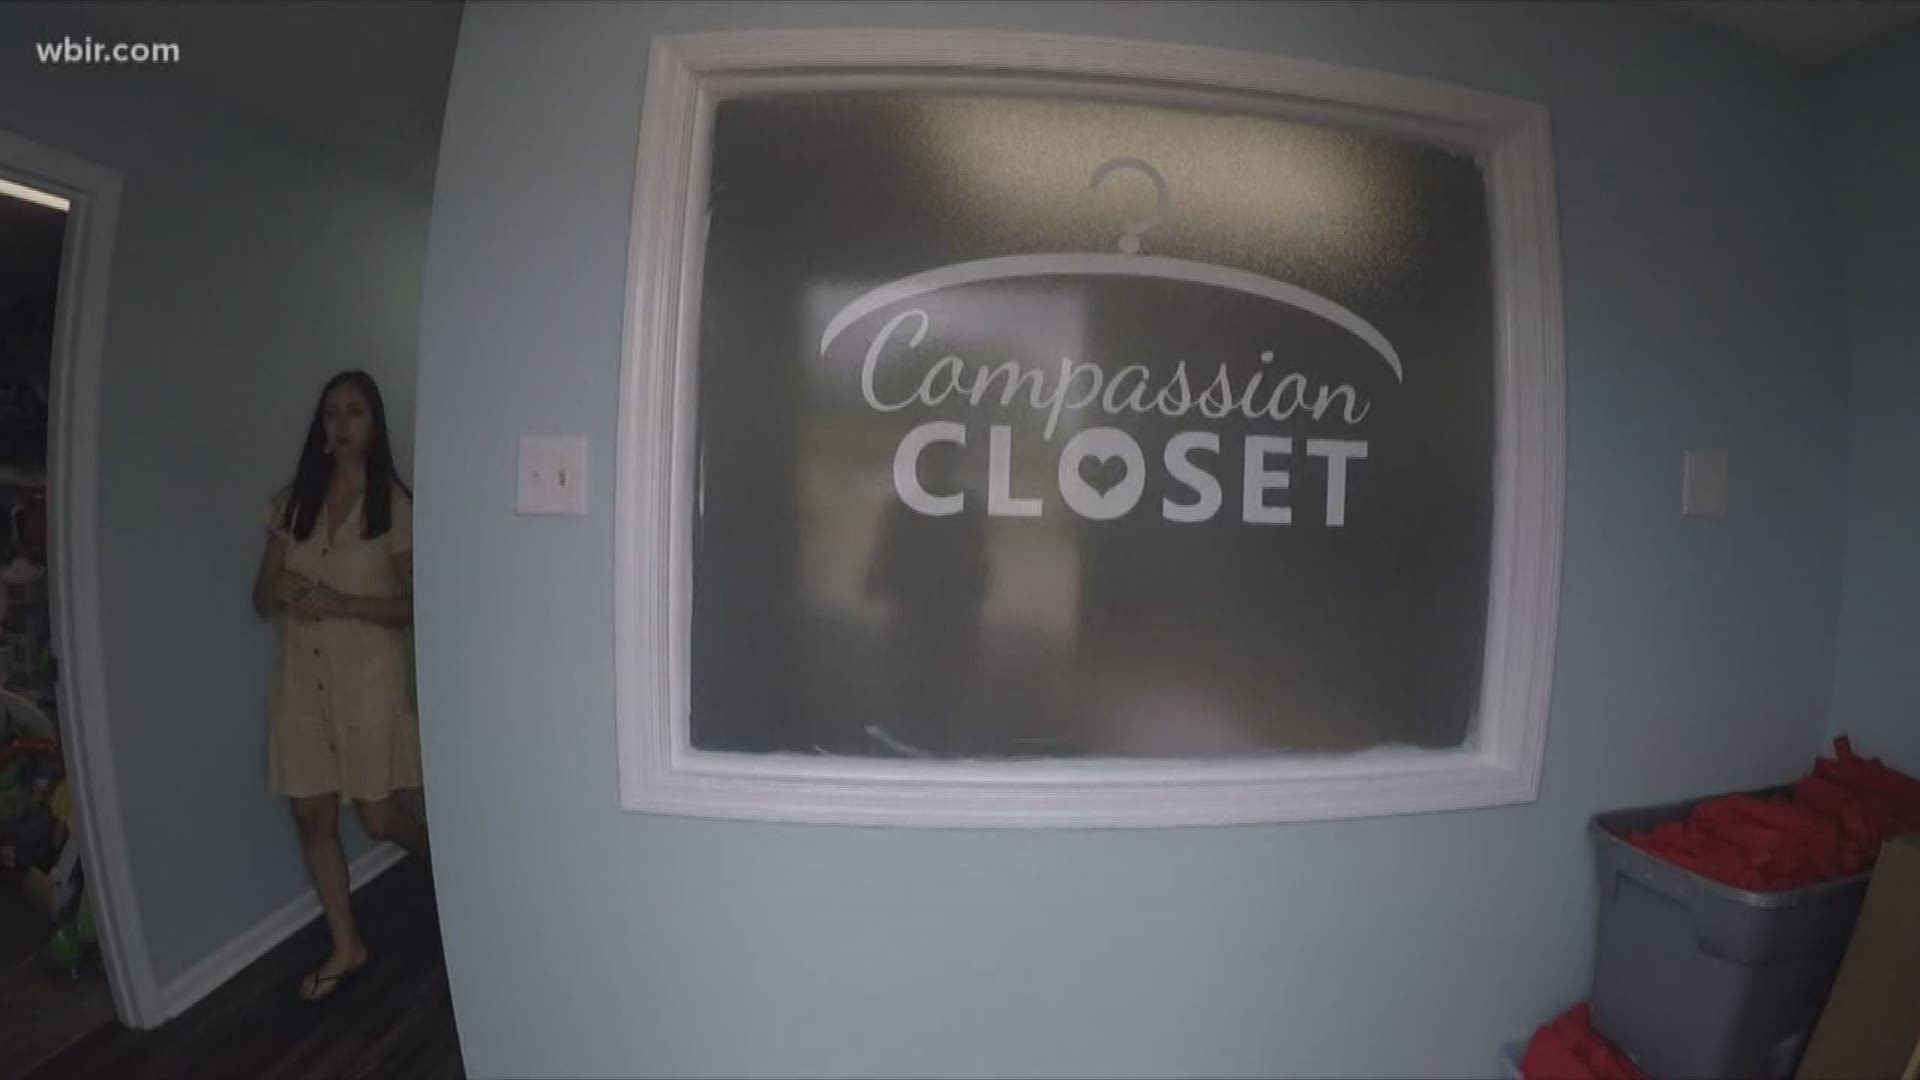 The Compassion Closet is a donation-based resource where families in need can walk in and grab anything from clothes to a crib.